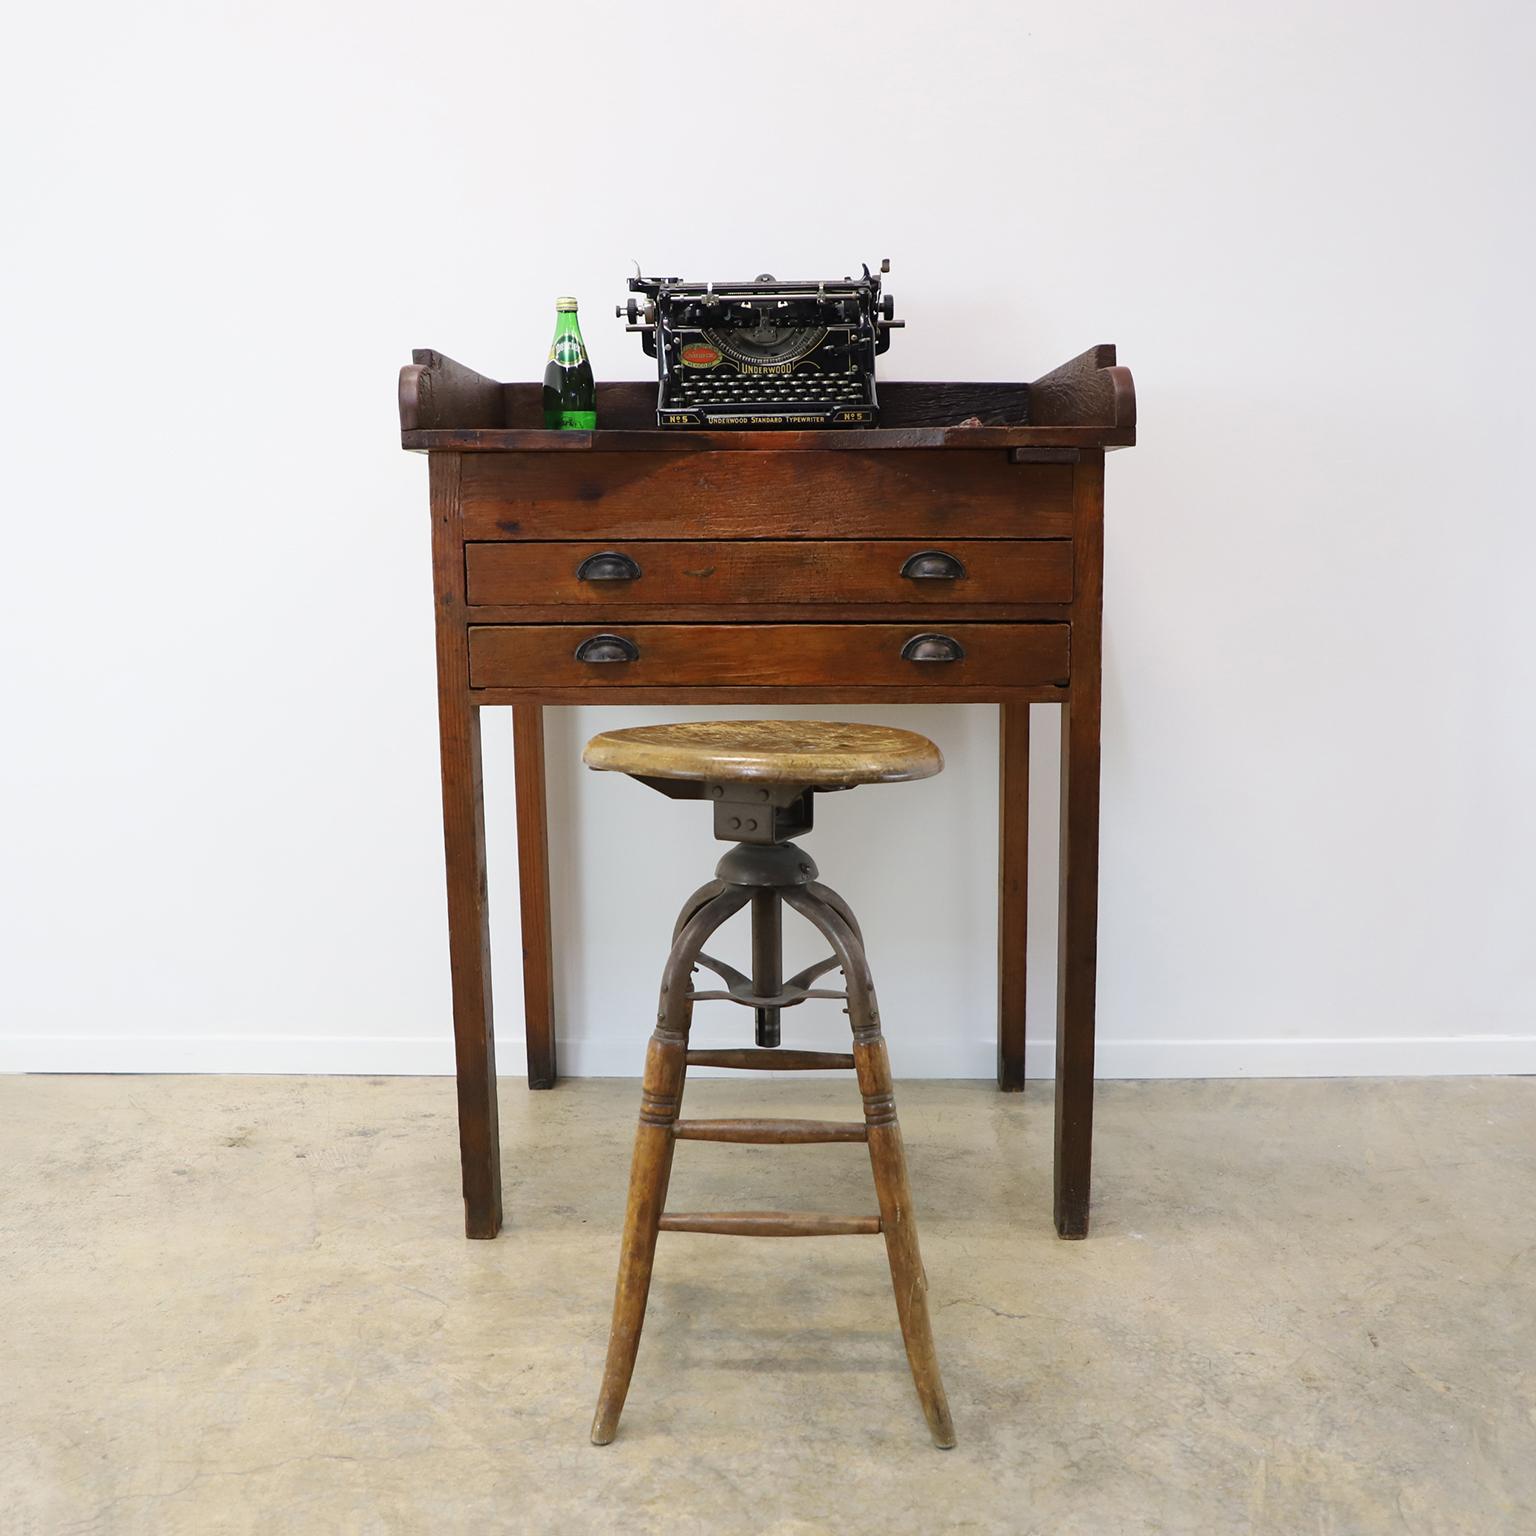 Mid-20th Century Antique Industrial Jeweler's Bench Work Table For Sale